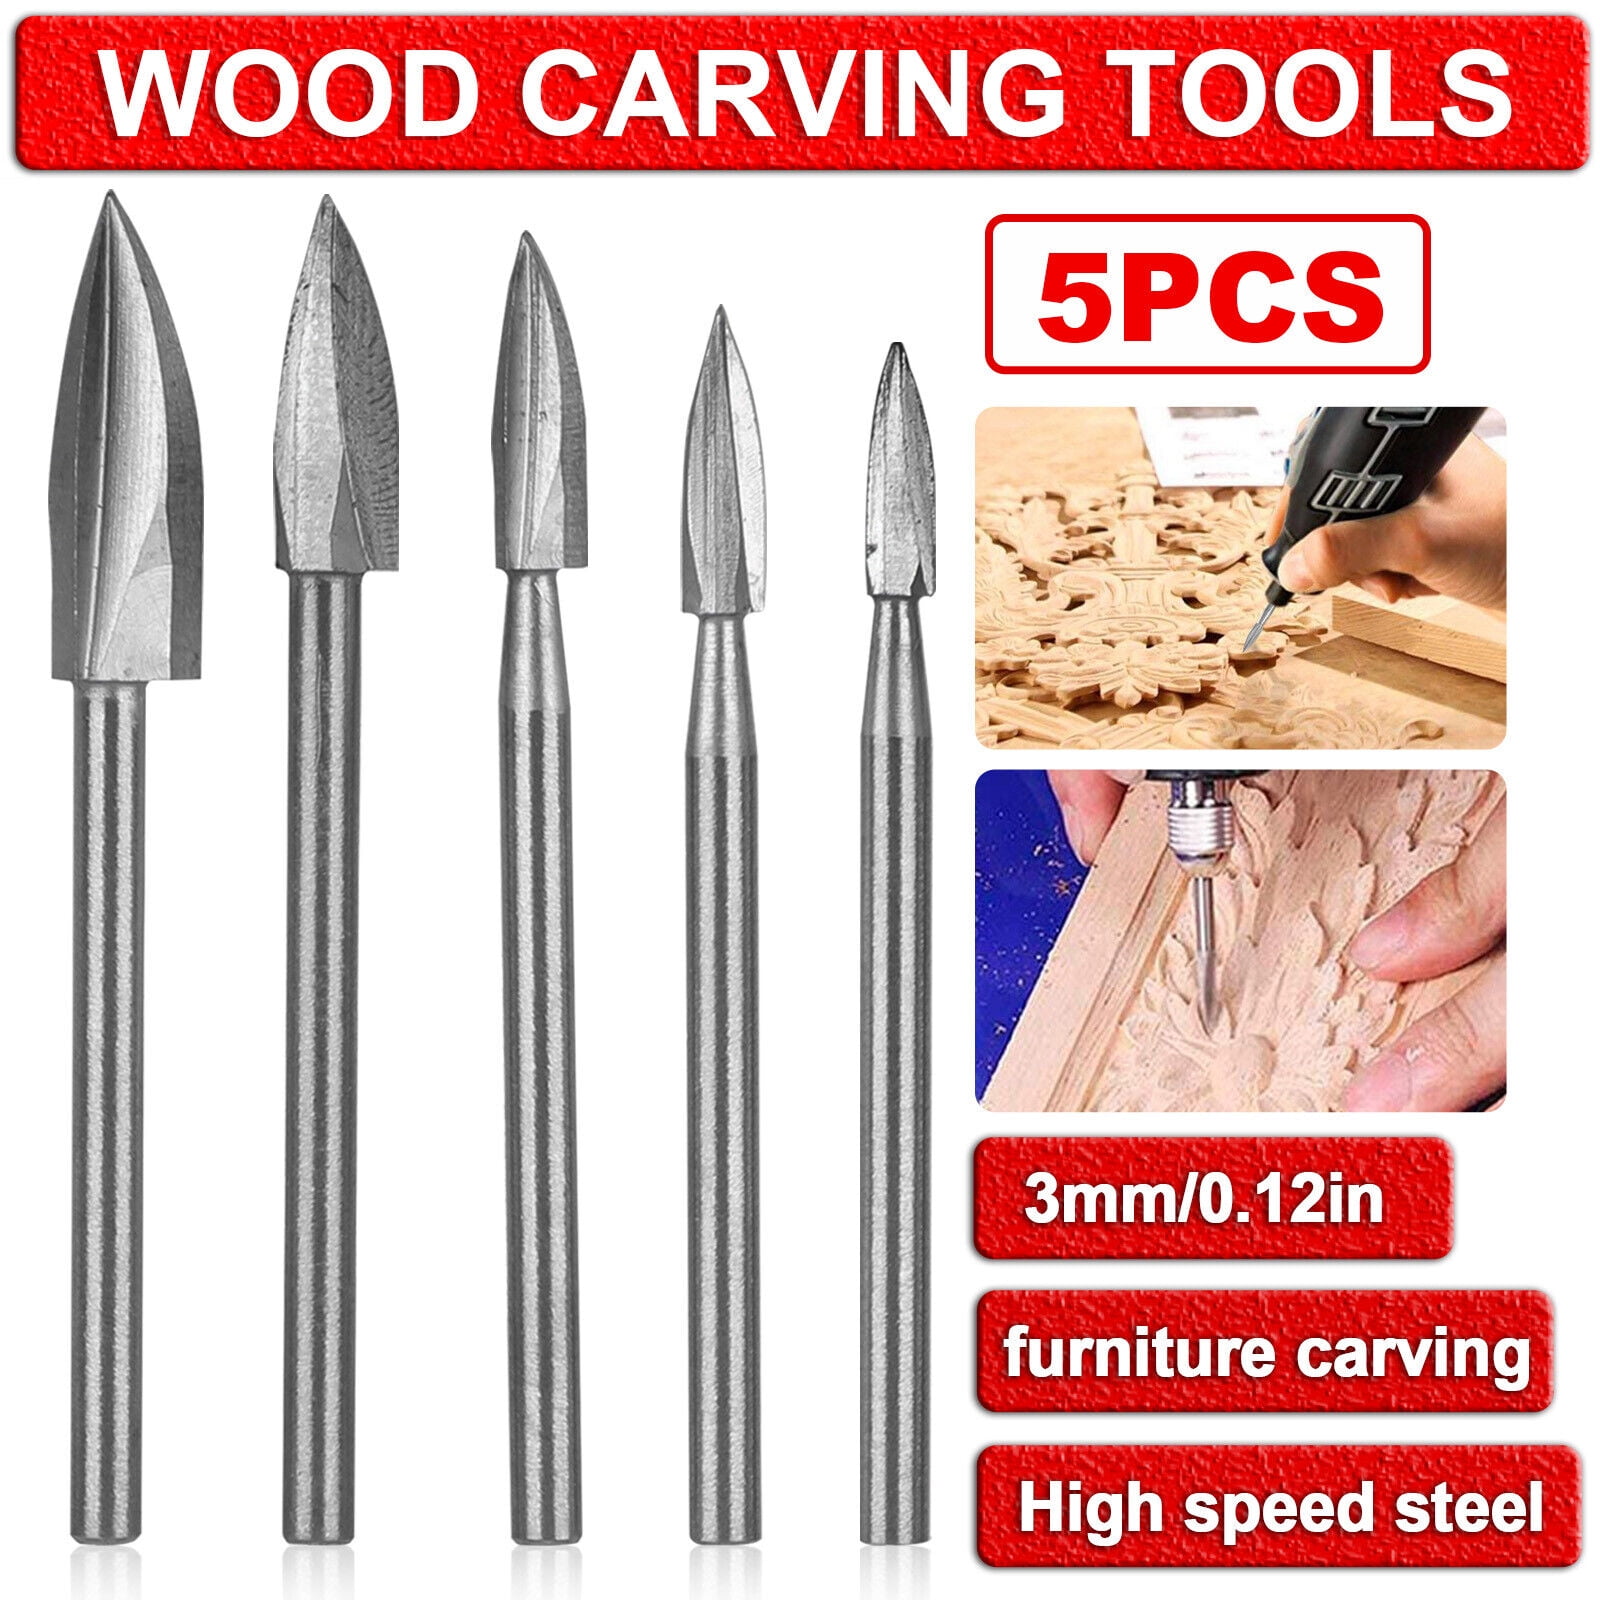 EEEkit 10pcs Wood Carving Drill Bits, Engraving Cutter Tools for Rotary Tools, Woodworking Tools for Drilling Micro Sculpture, Size: 0.12